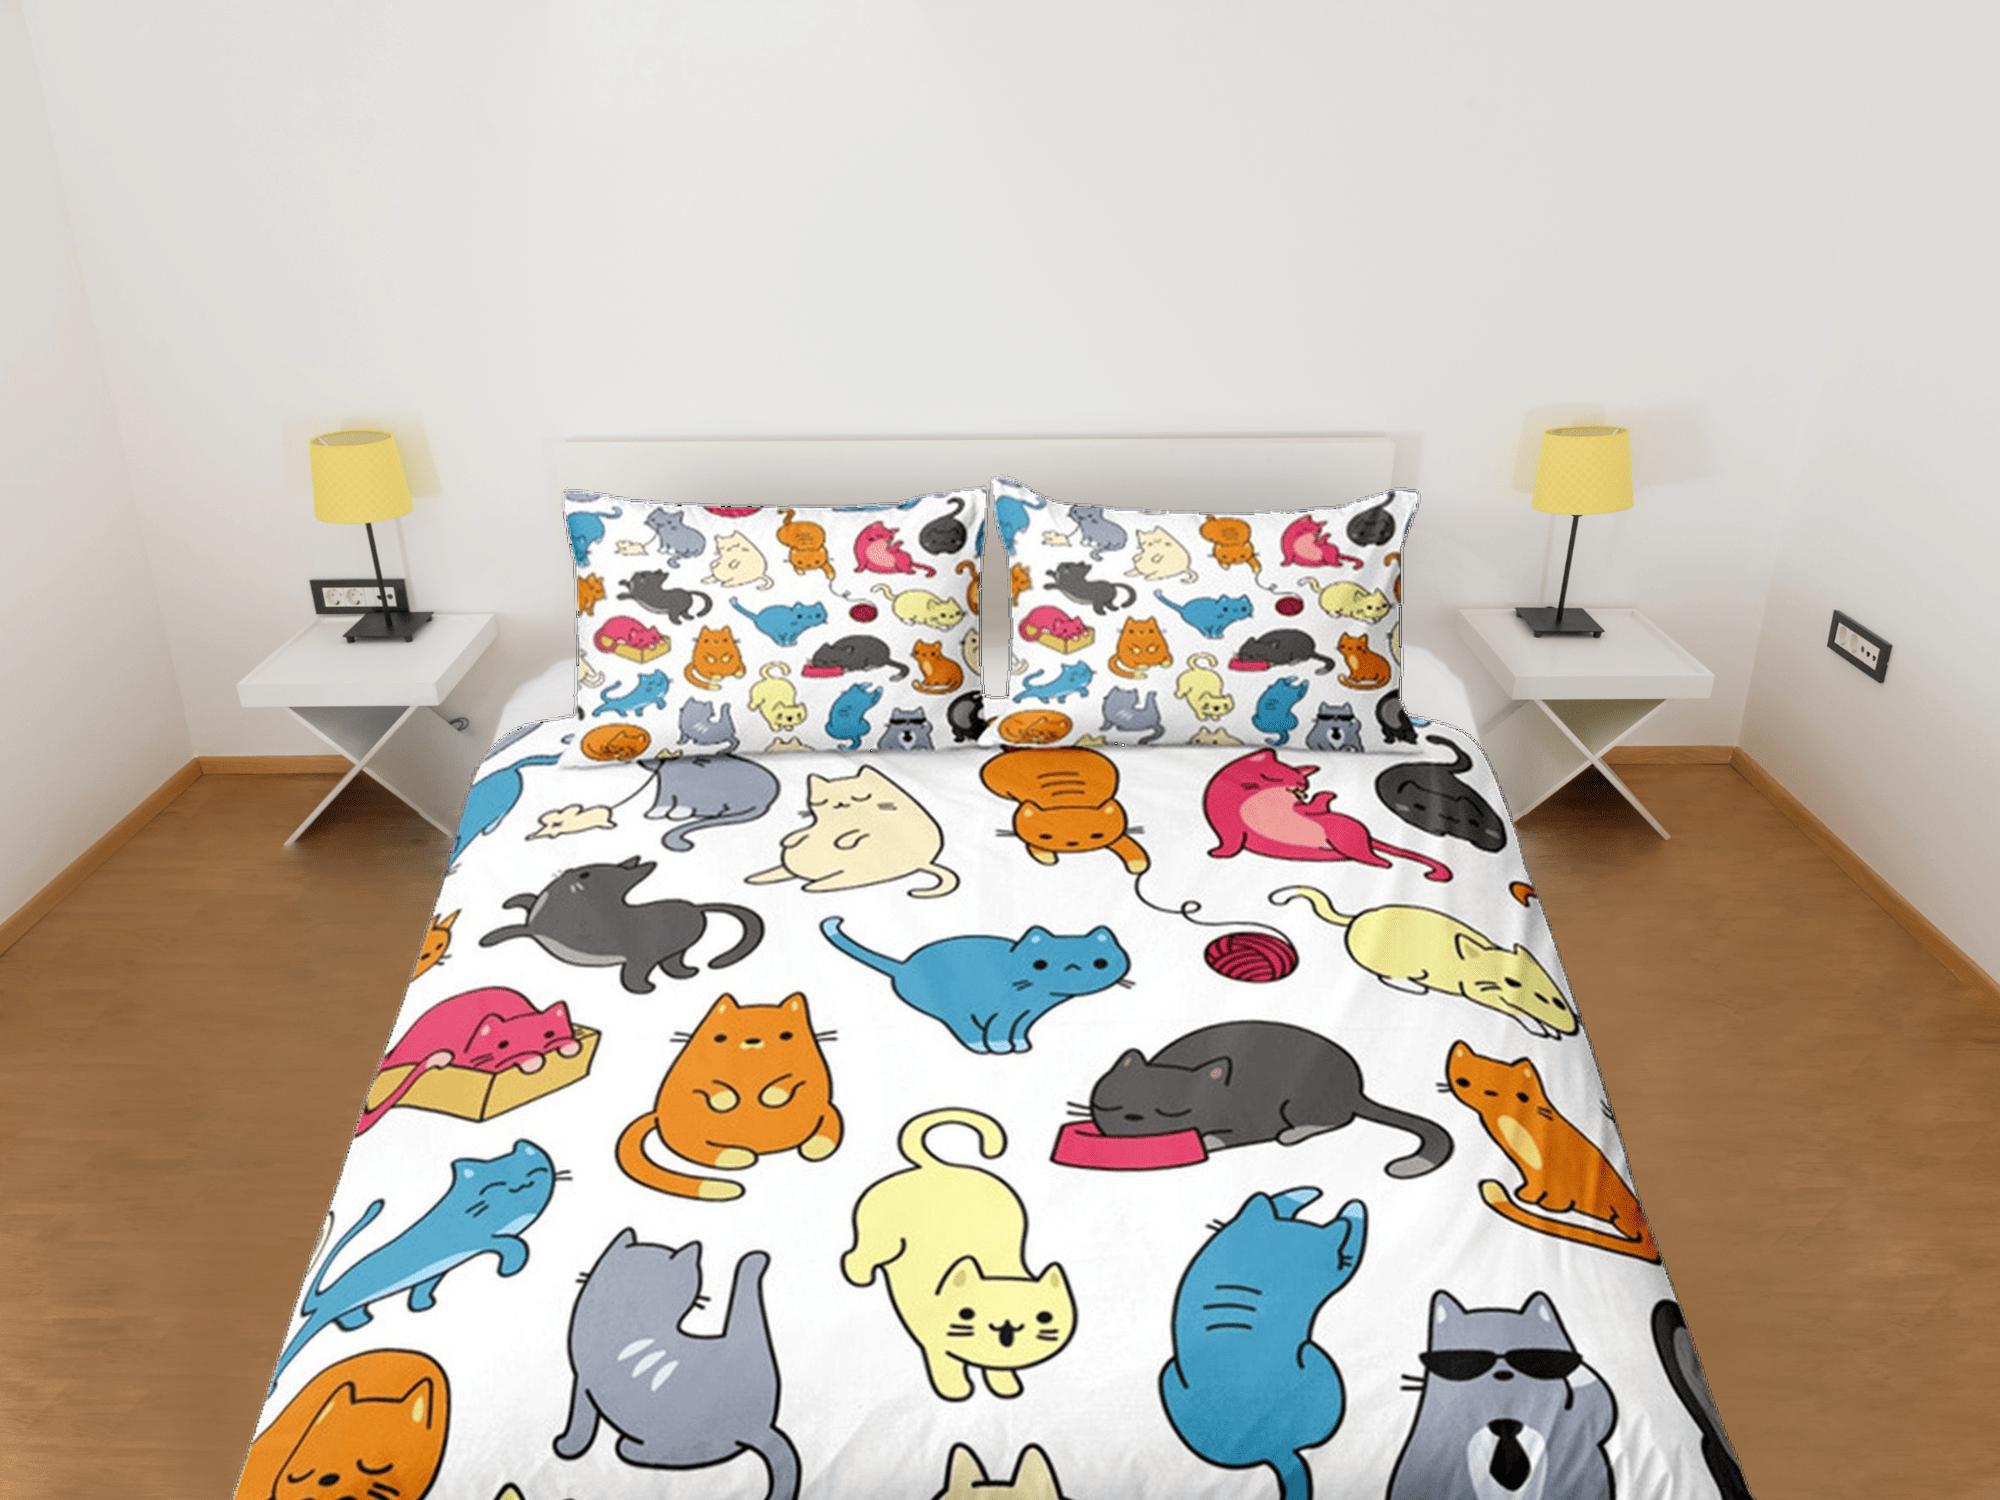 daintyduvet Funny Cats Duvet Cover Set Cute Bedspread, Colorful Kids Bedding Pillowcase Comforter Cover